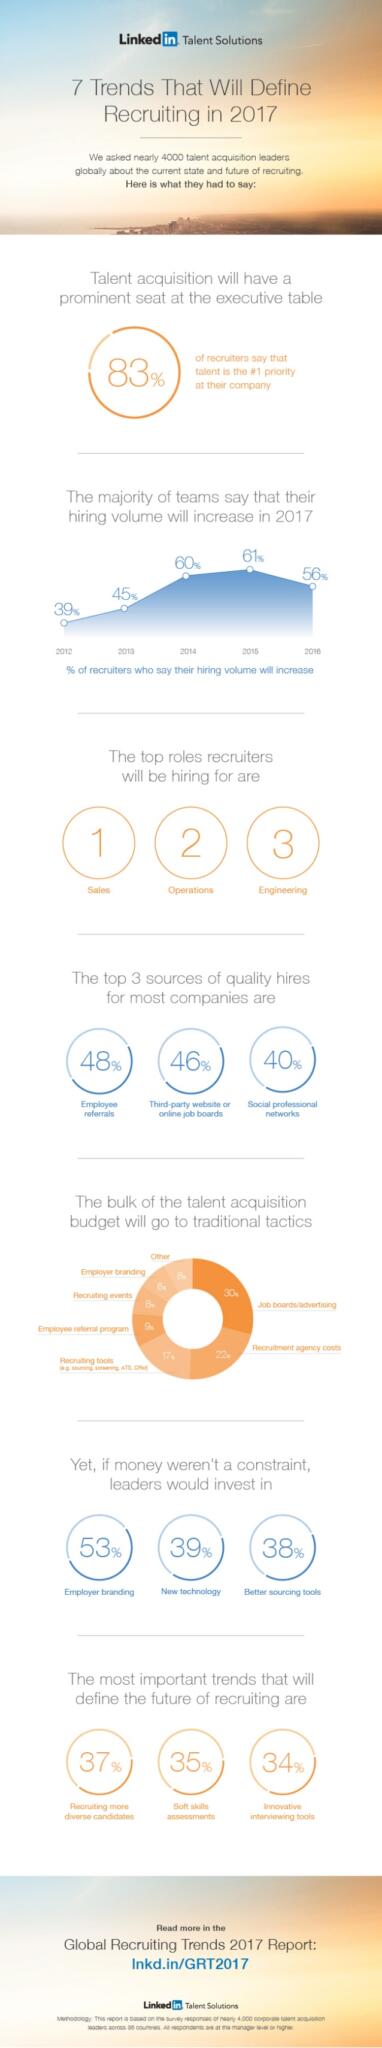 global-recruiting-trends-2017-infographic-1-638